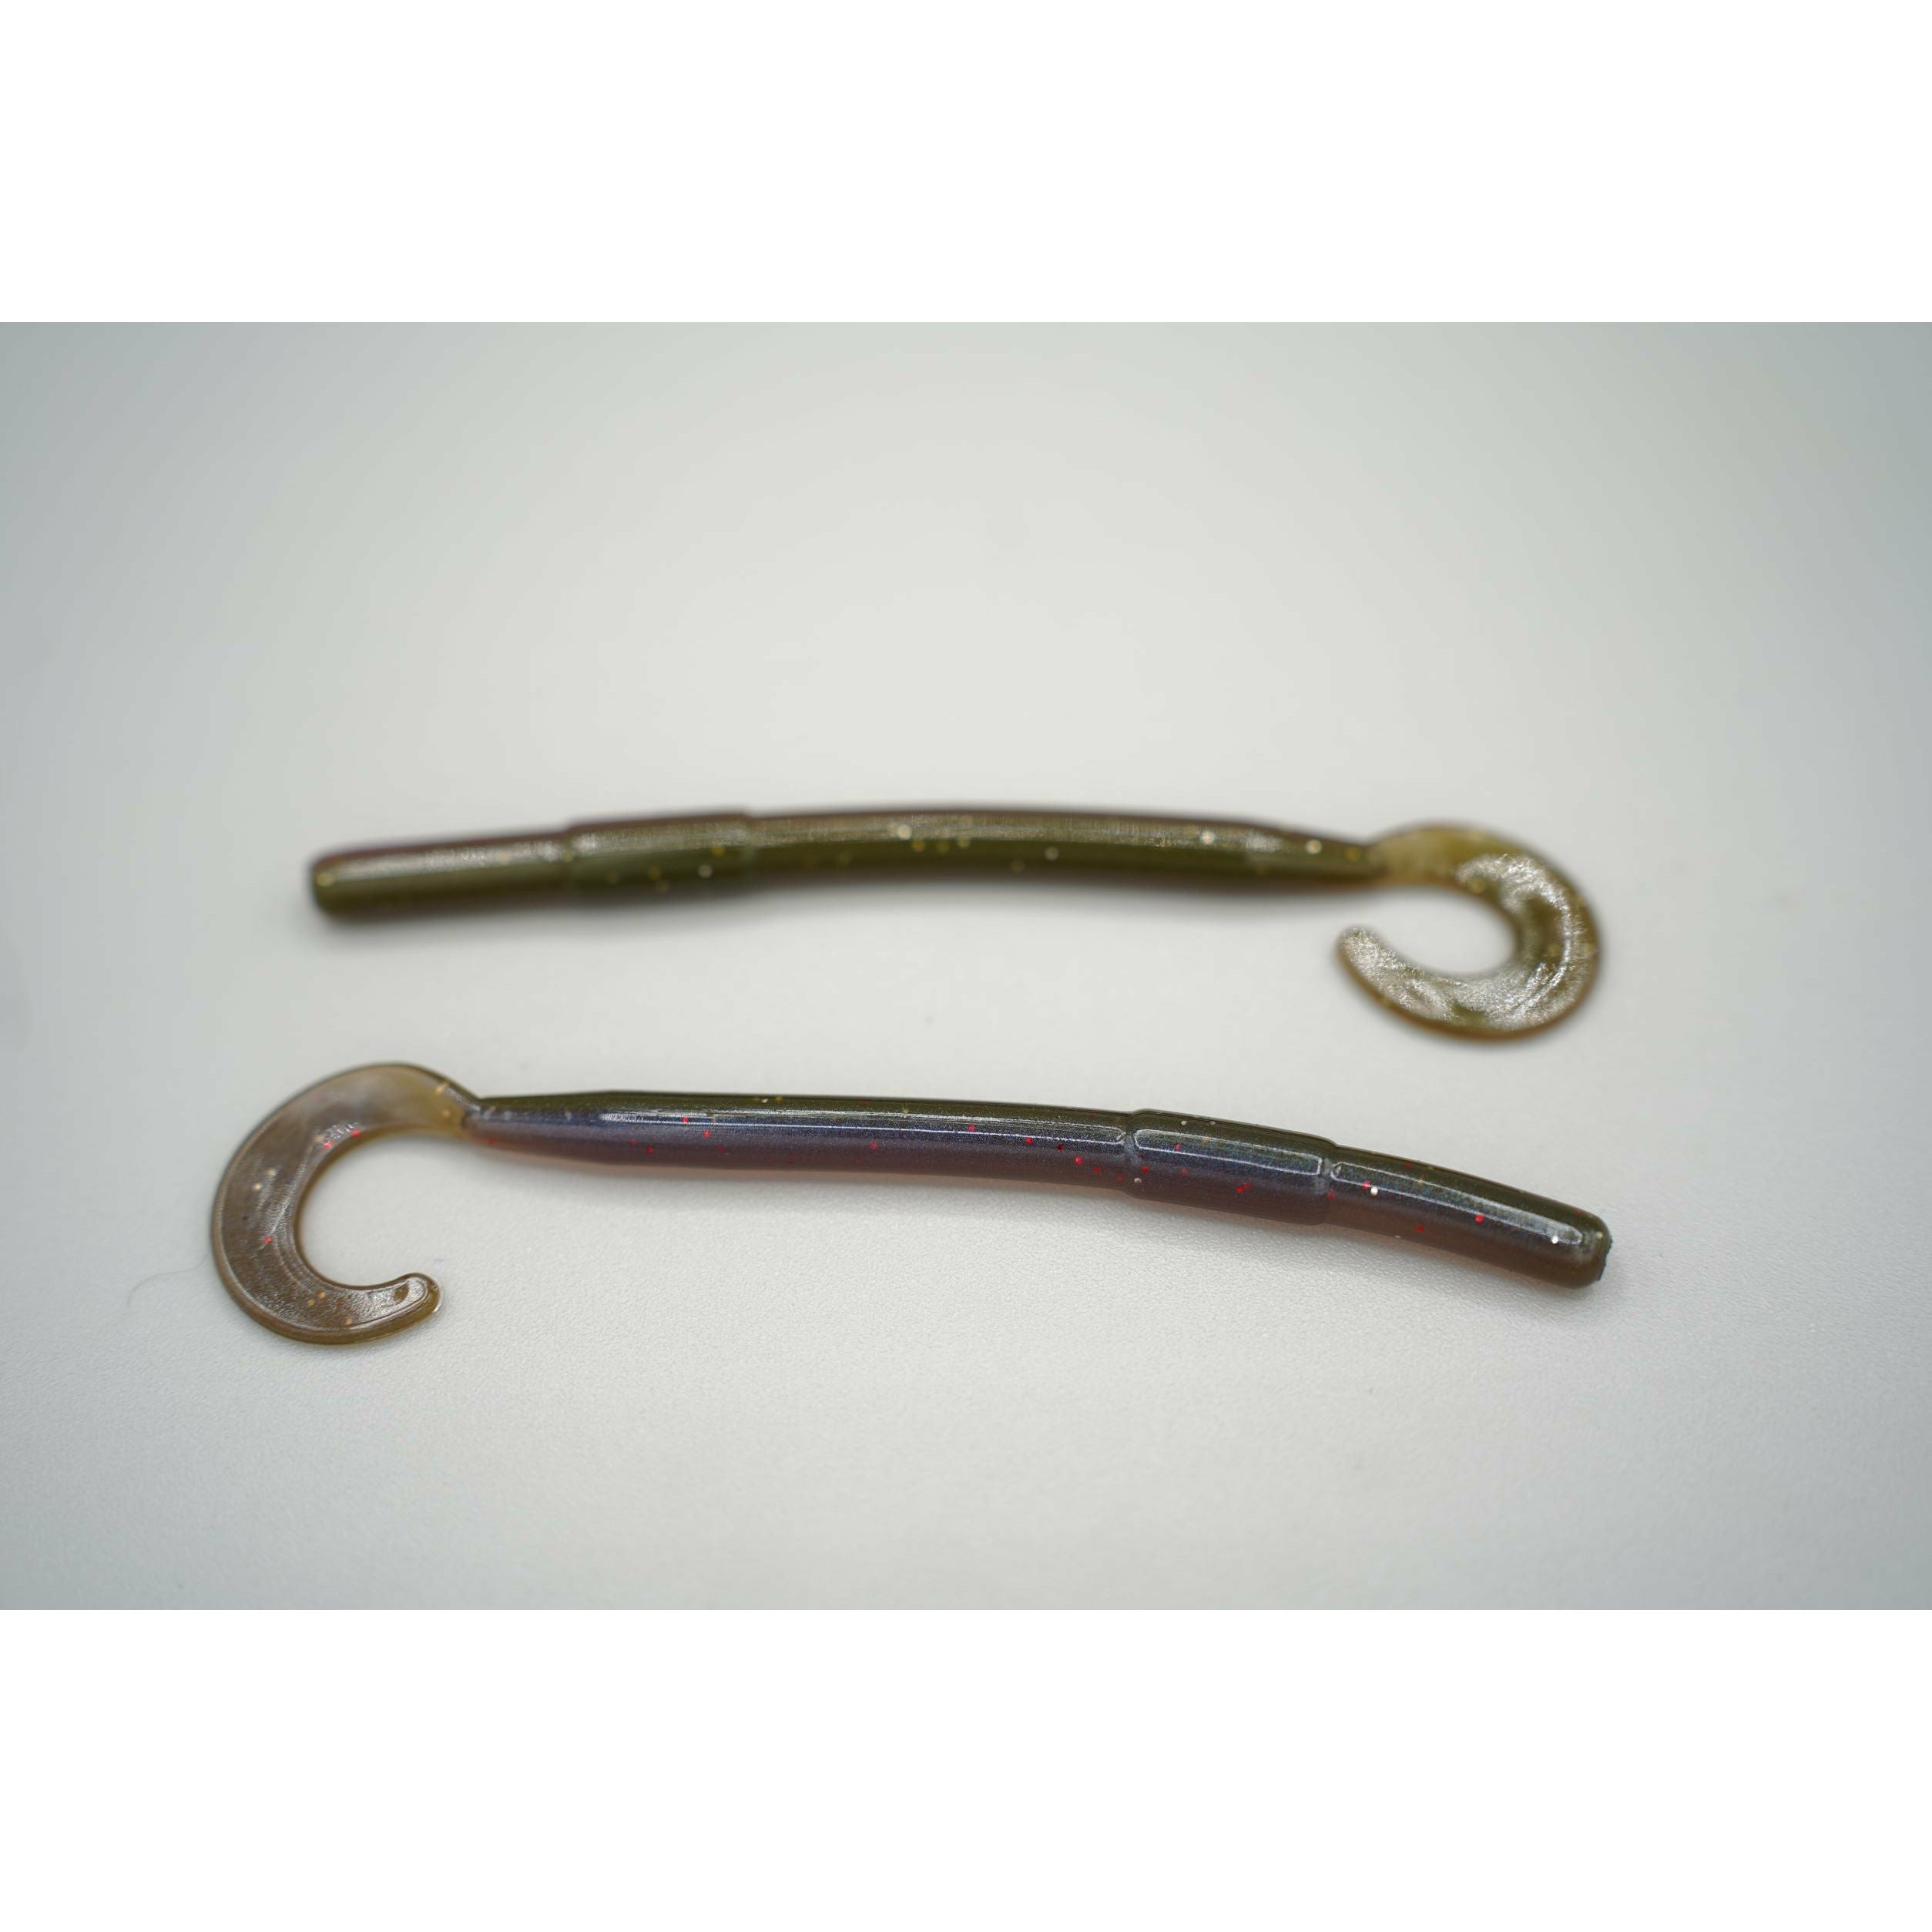 Buy Soft Plastic Worms Online, Bass Fishing Accessories, Soft Plastics  Curly Tail Worms